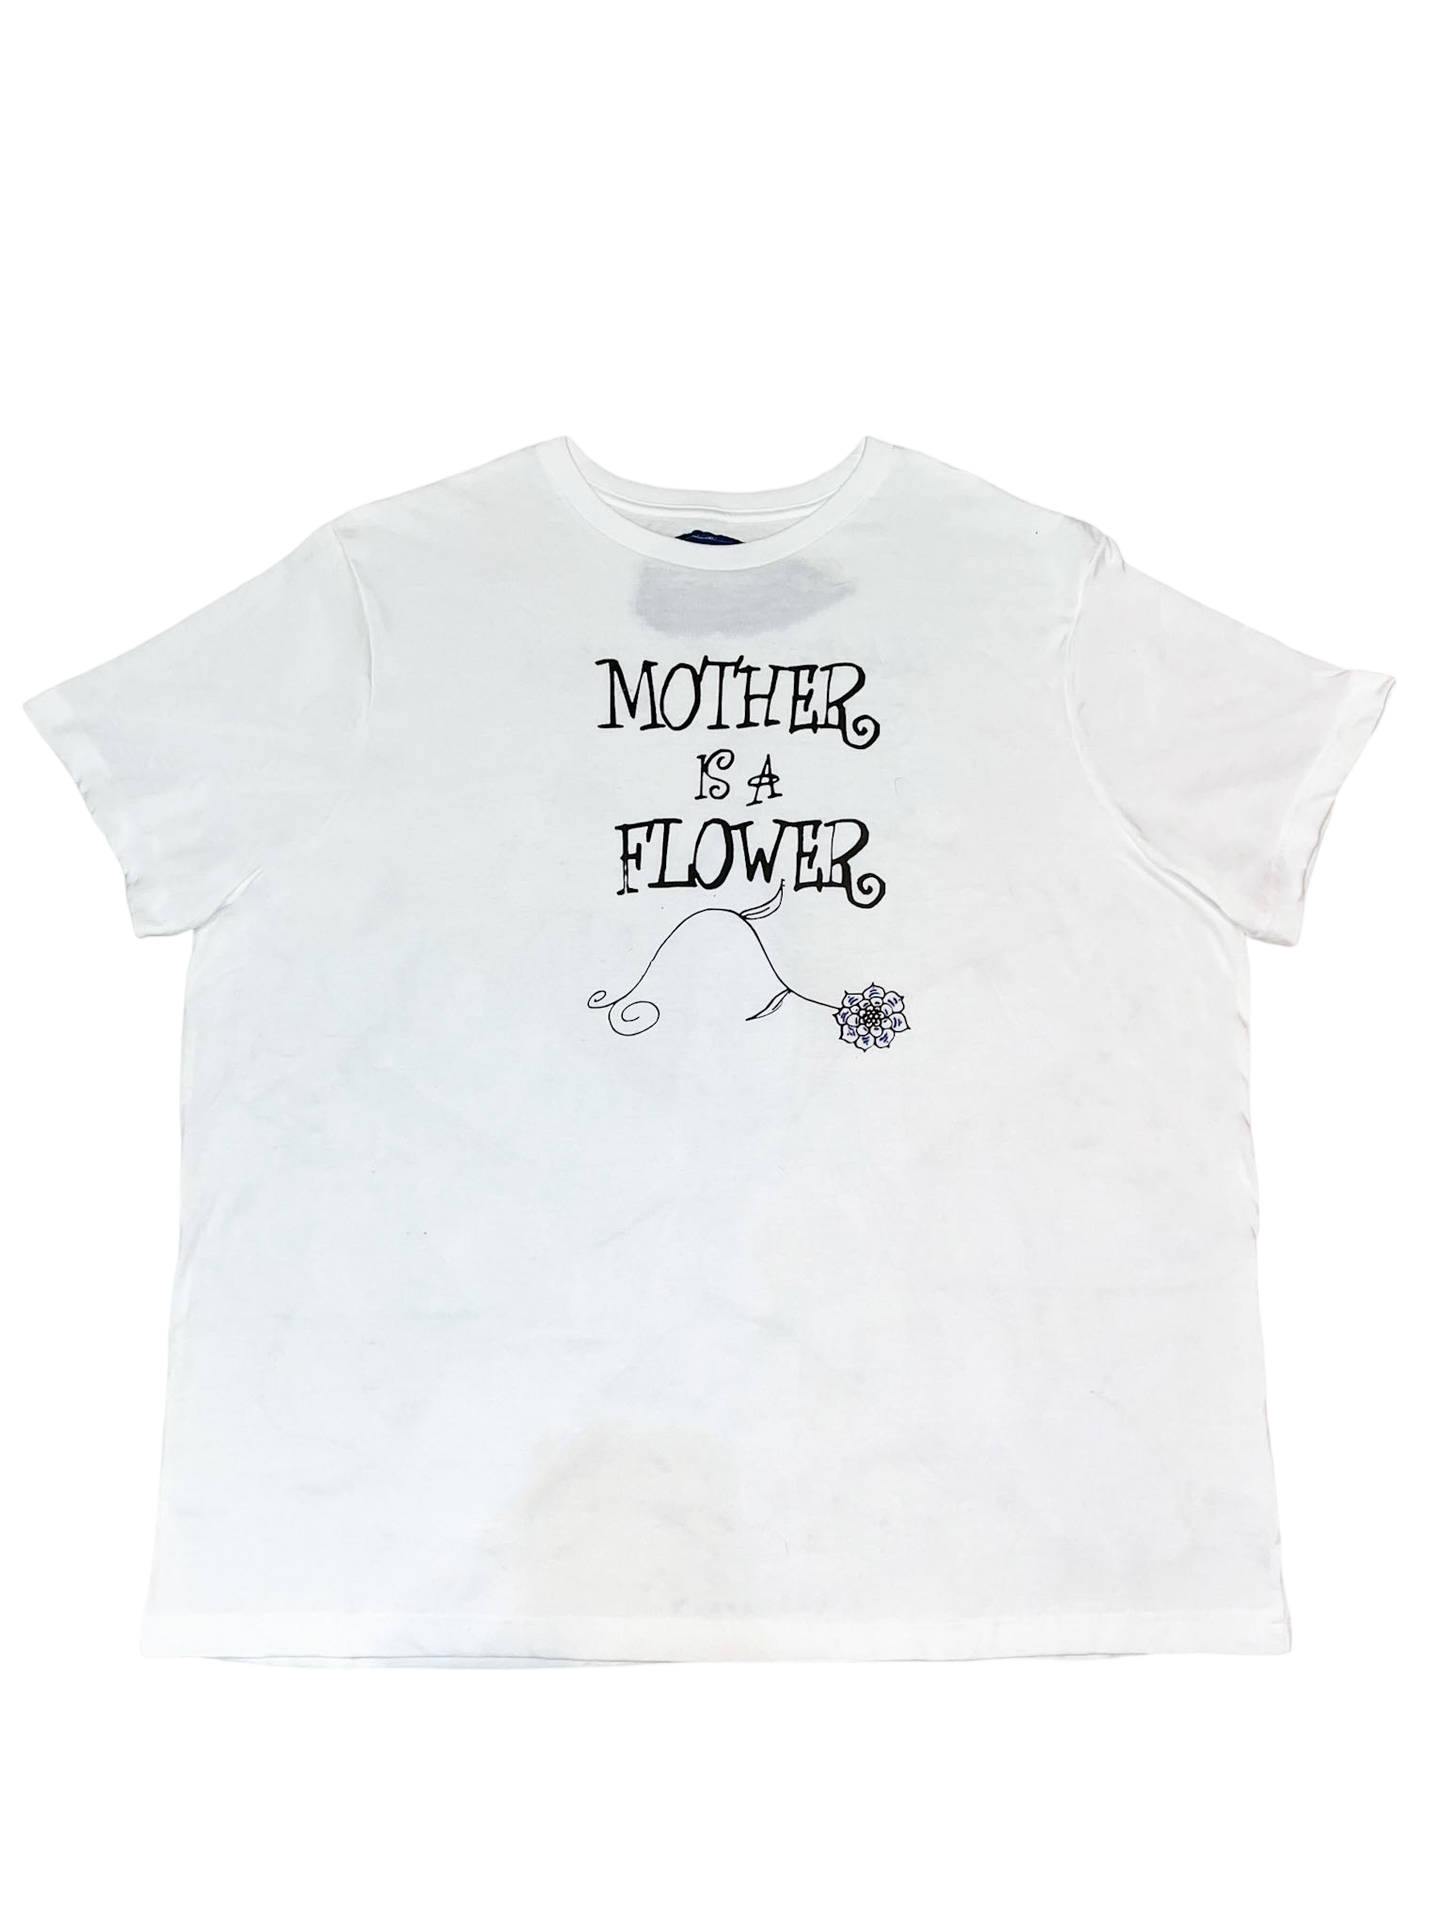 Mother is a Flower Tee 7/14 (Size: 3X LARGE)